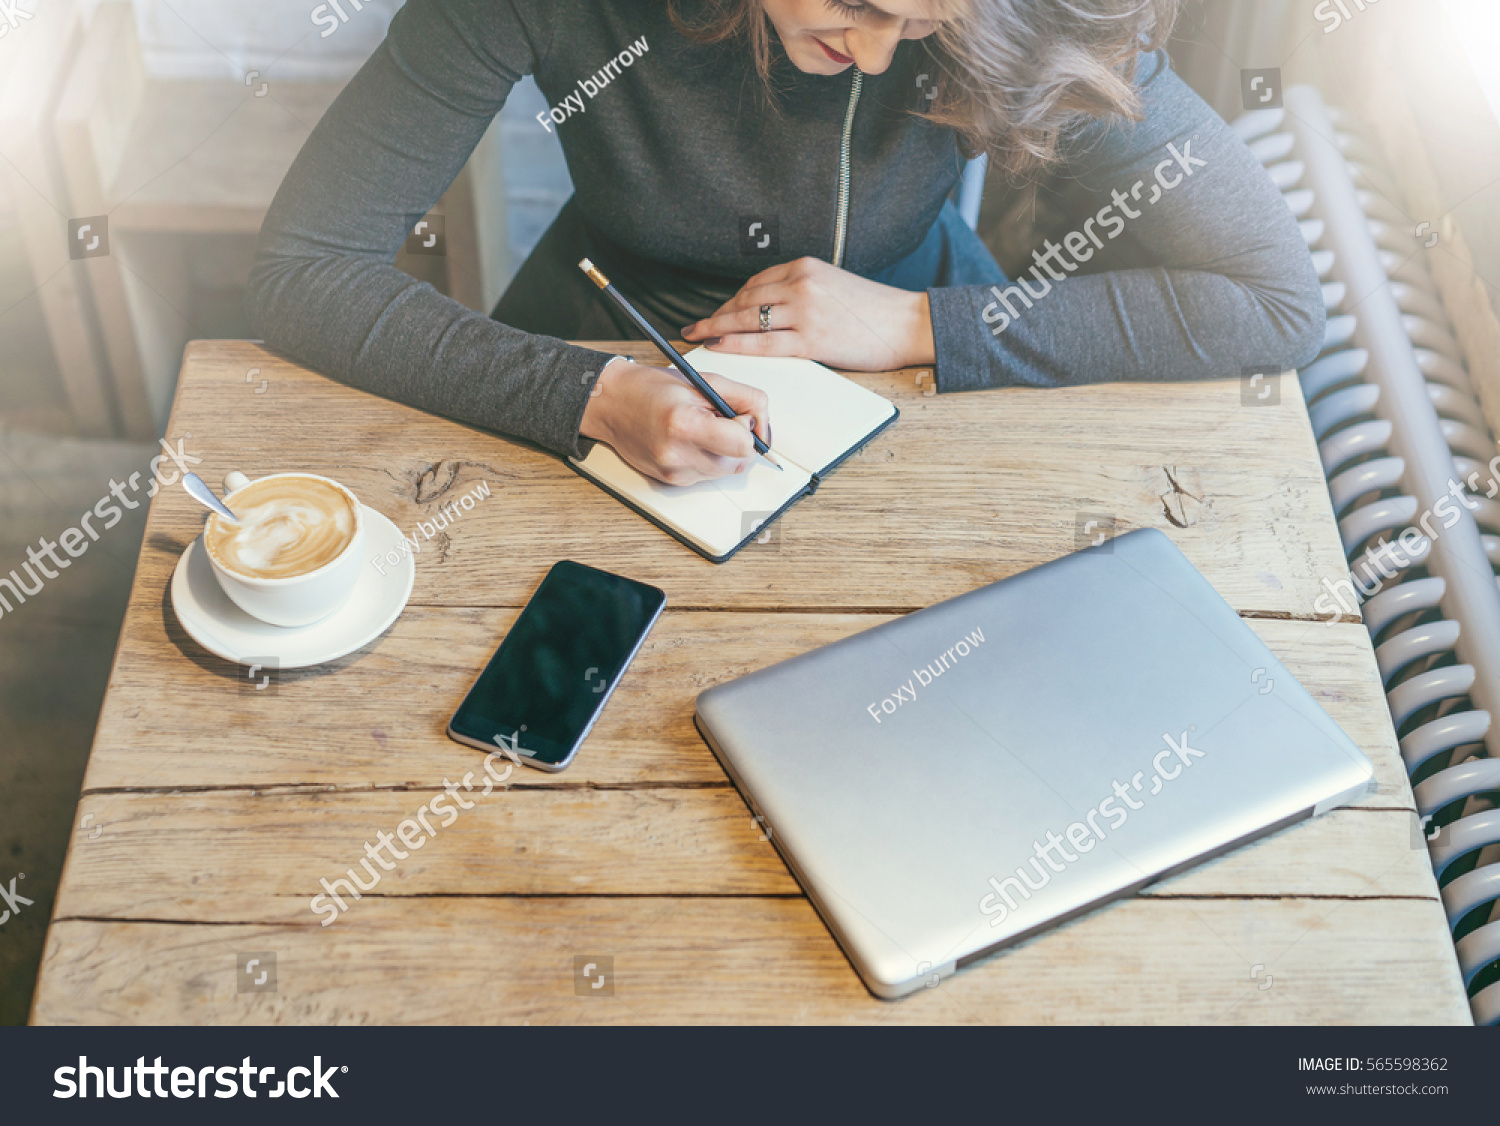 Top view. Young business woman sitting at wooden table in cafe and making notes in notebook. Nearby is cup of coffee, smartphone with blank screen and closed laptop. Student learning online. #565598362